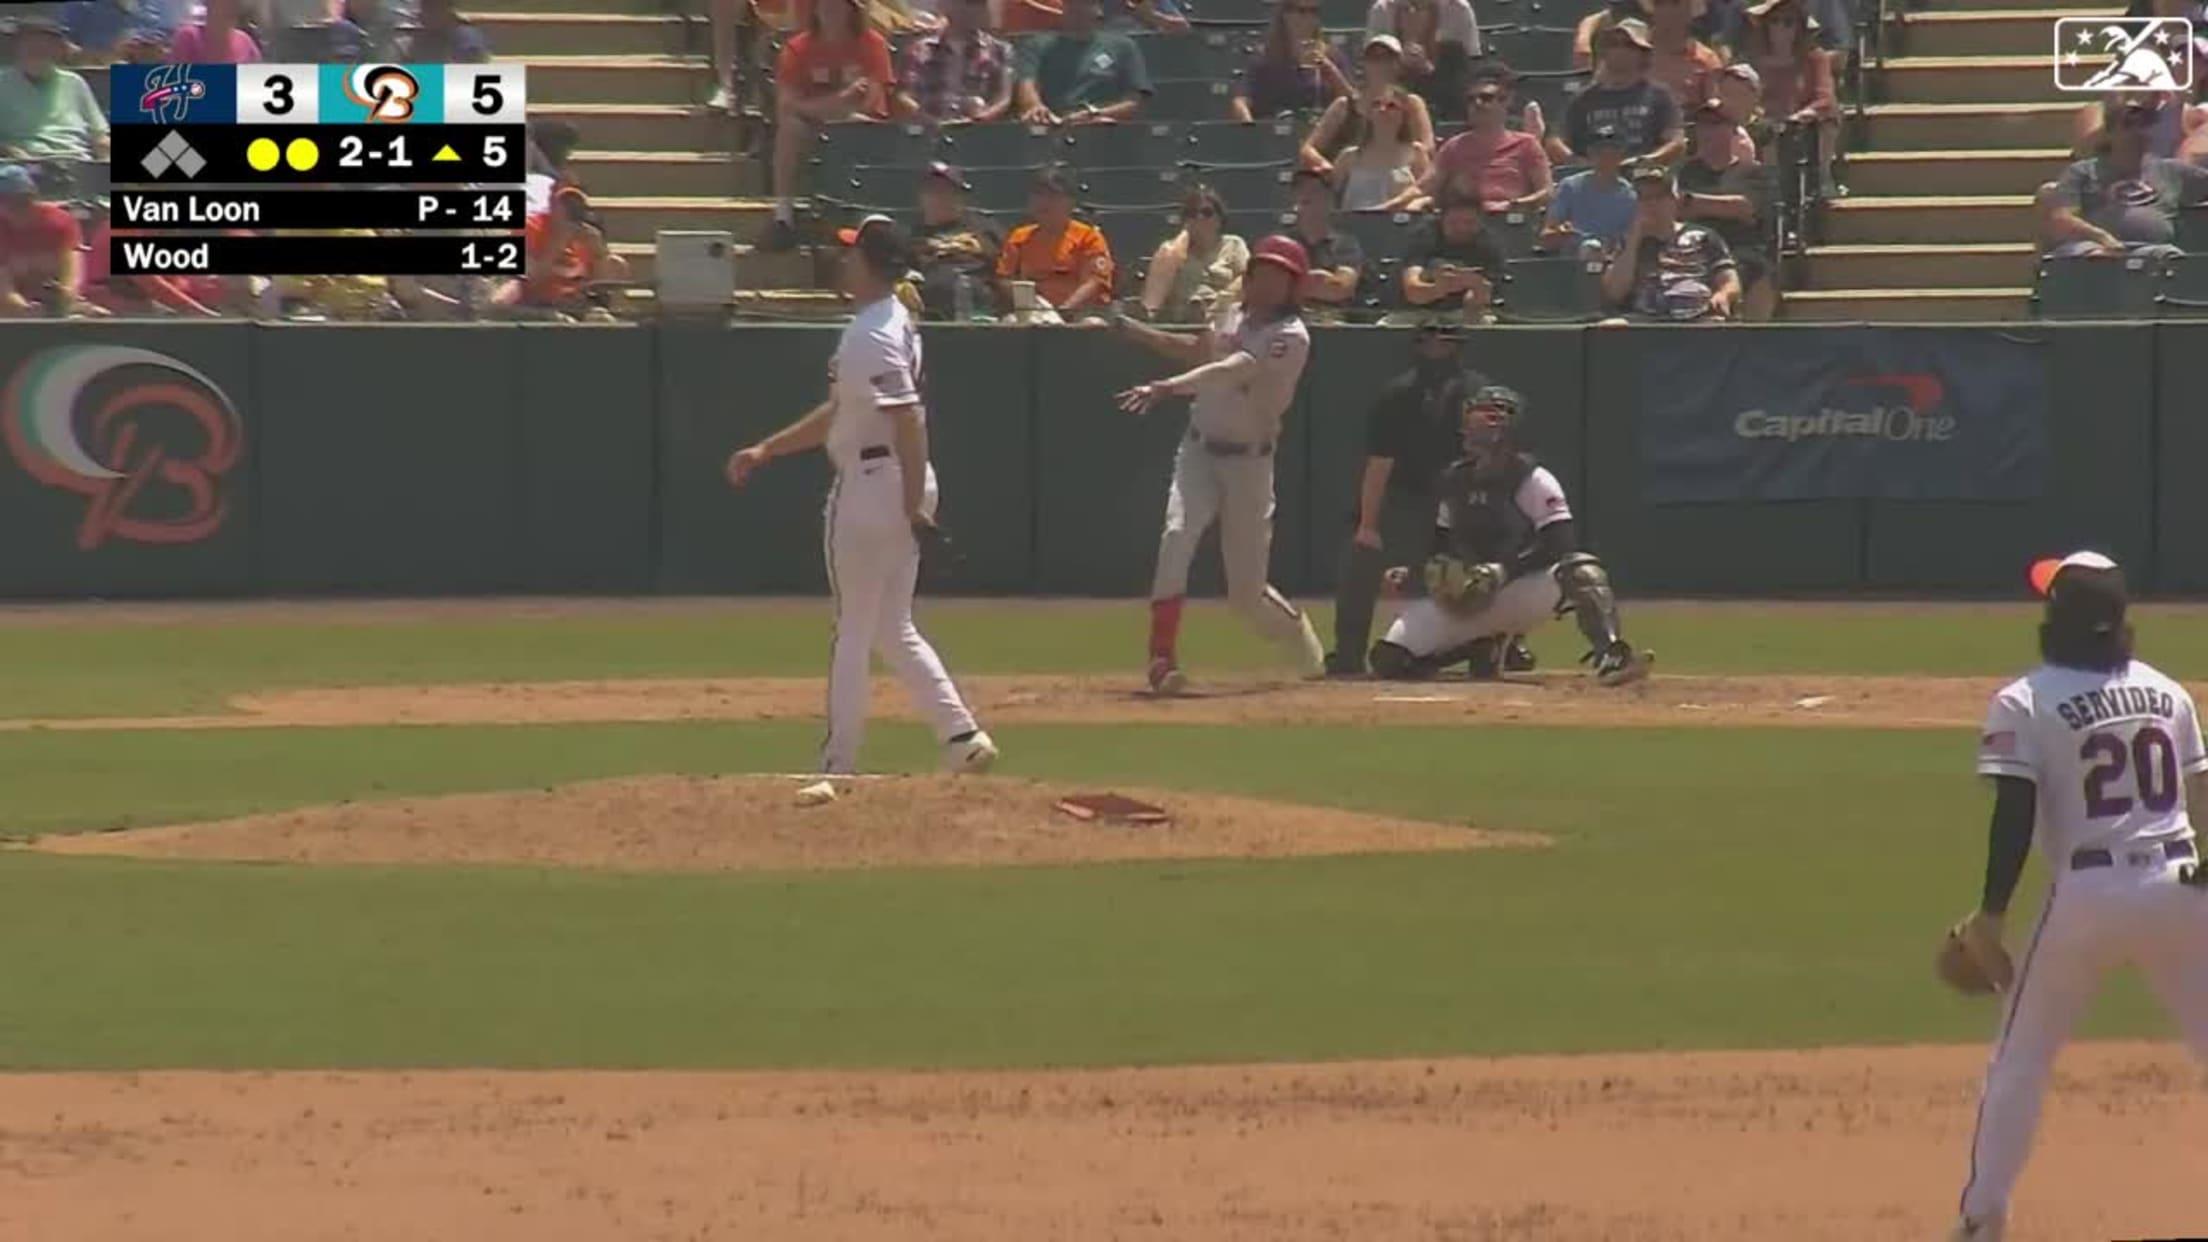 James Wood's solo home run